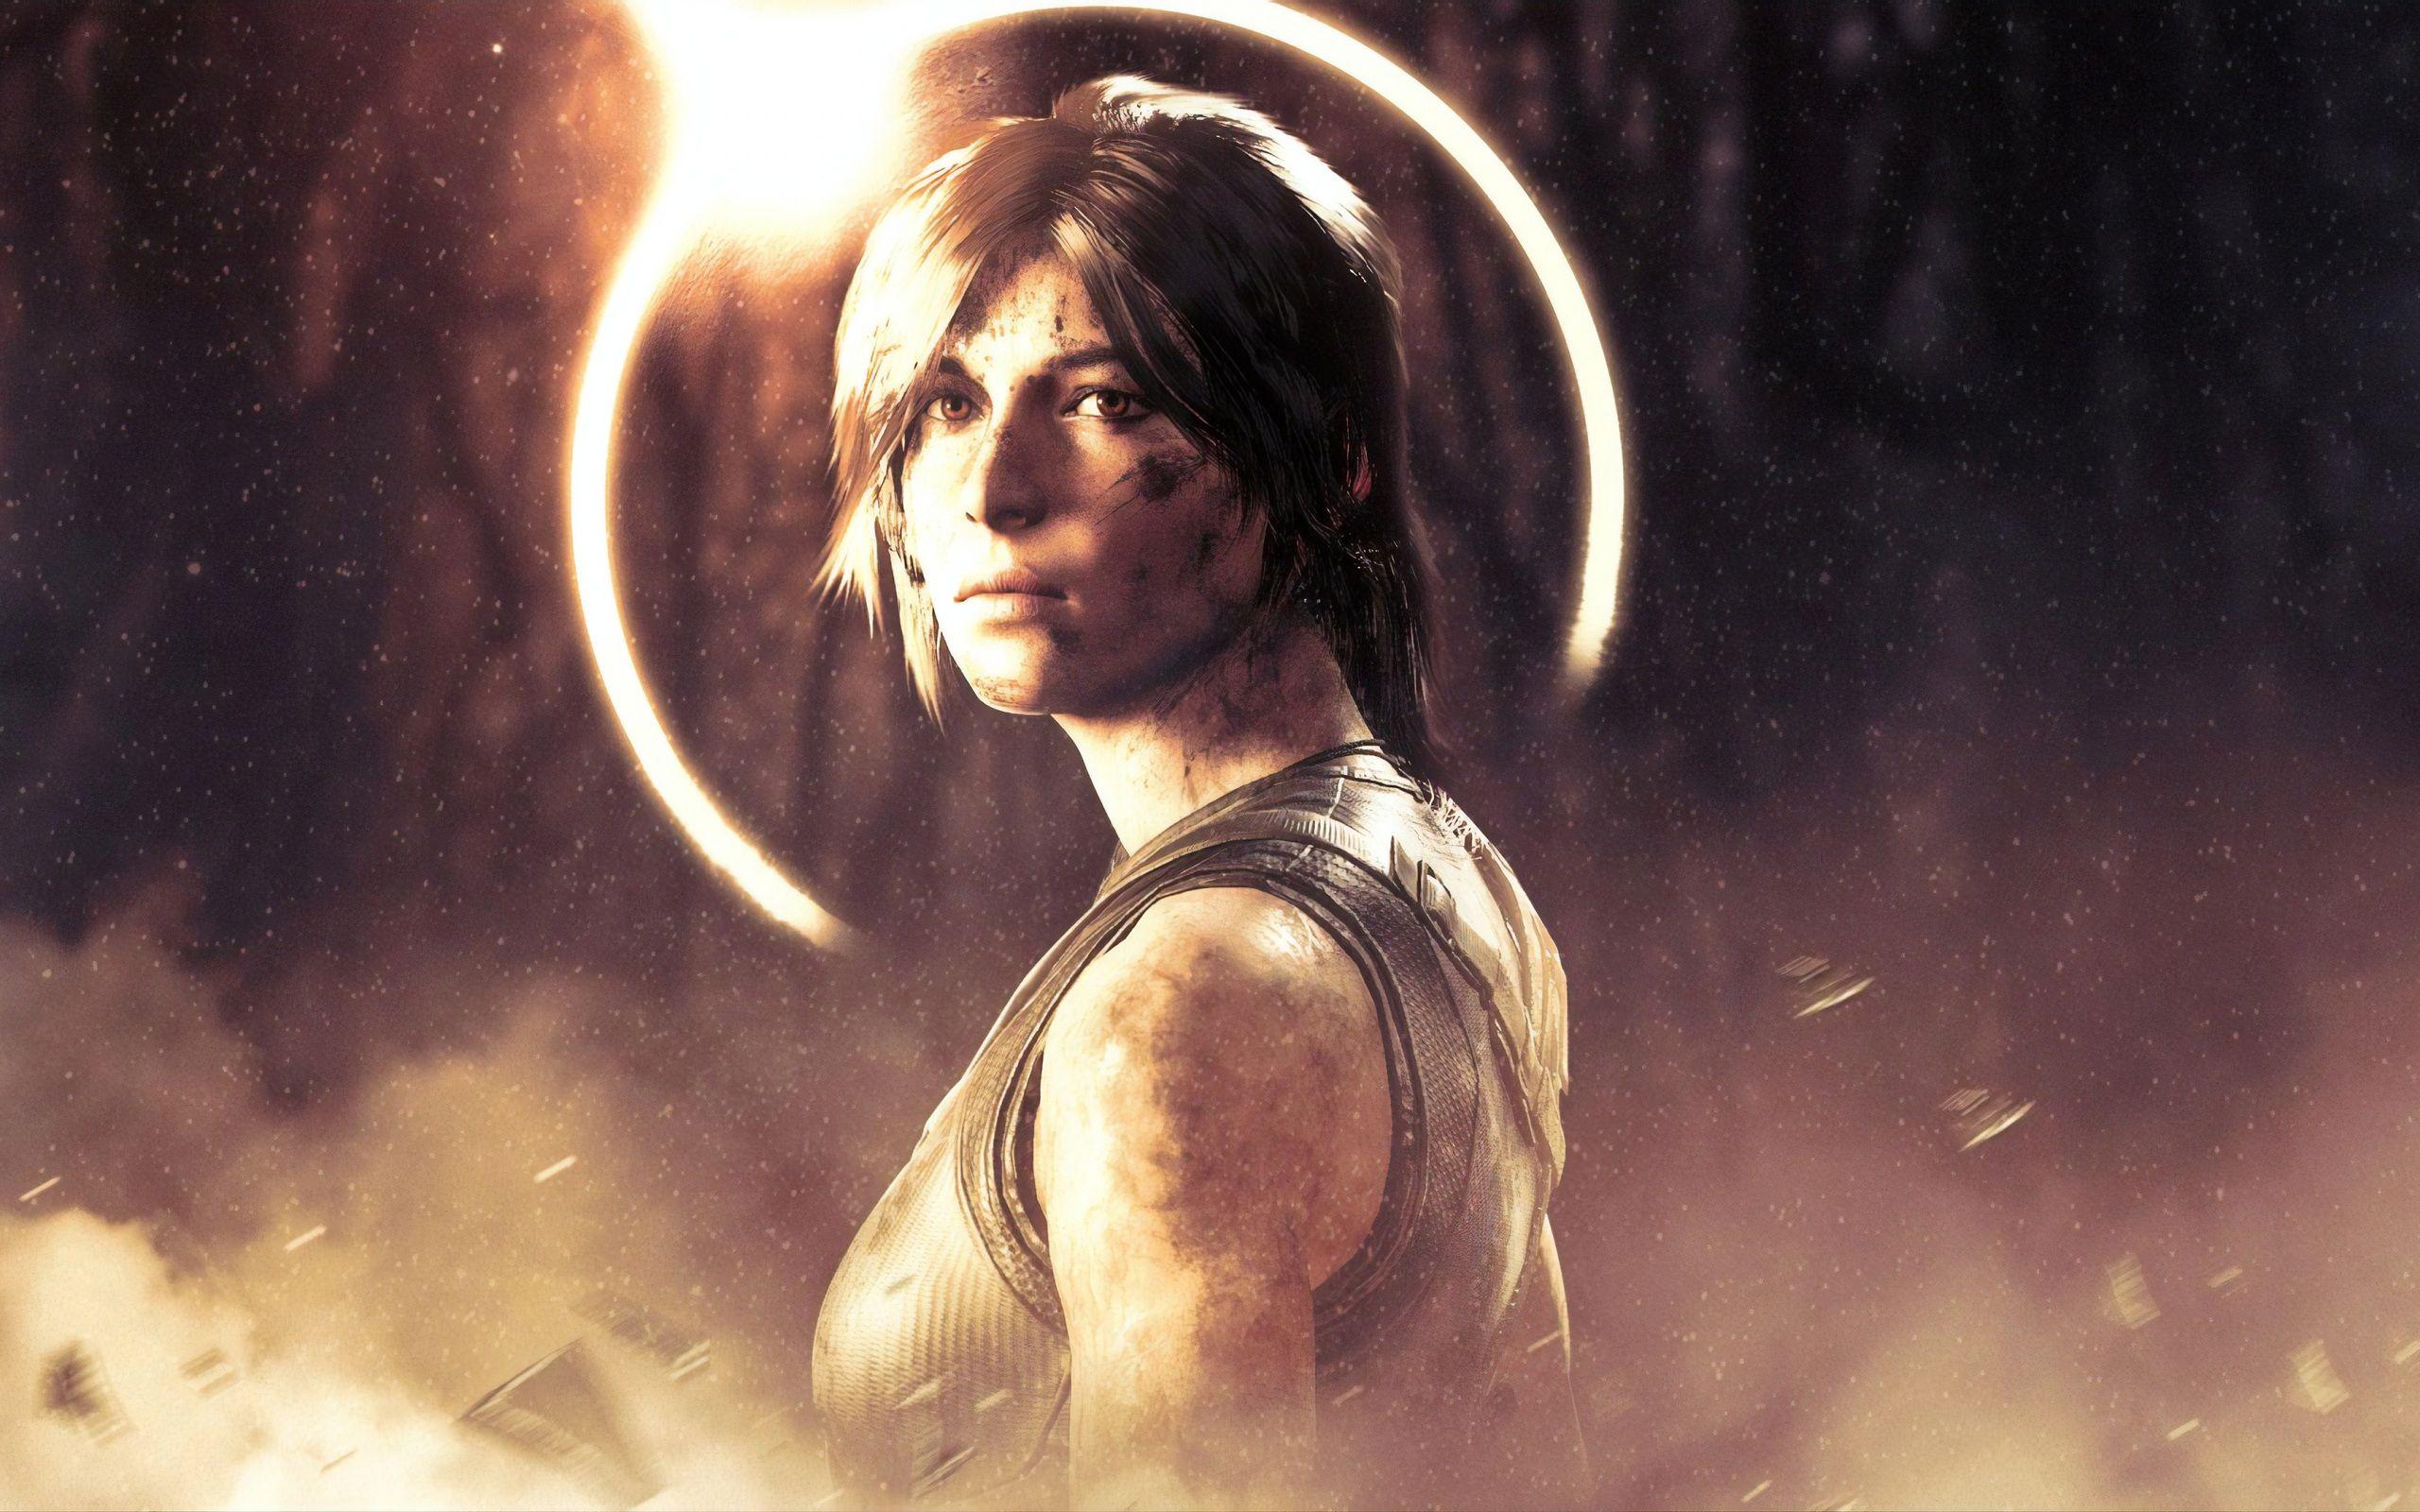 best shadow of the tomb raider image